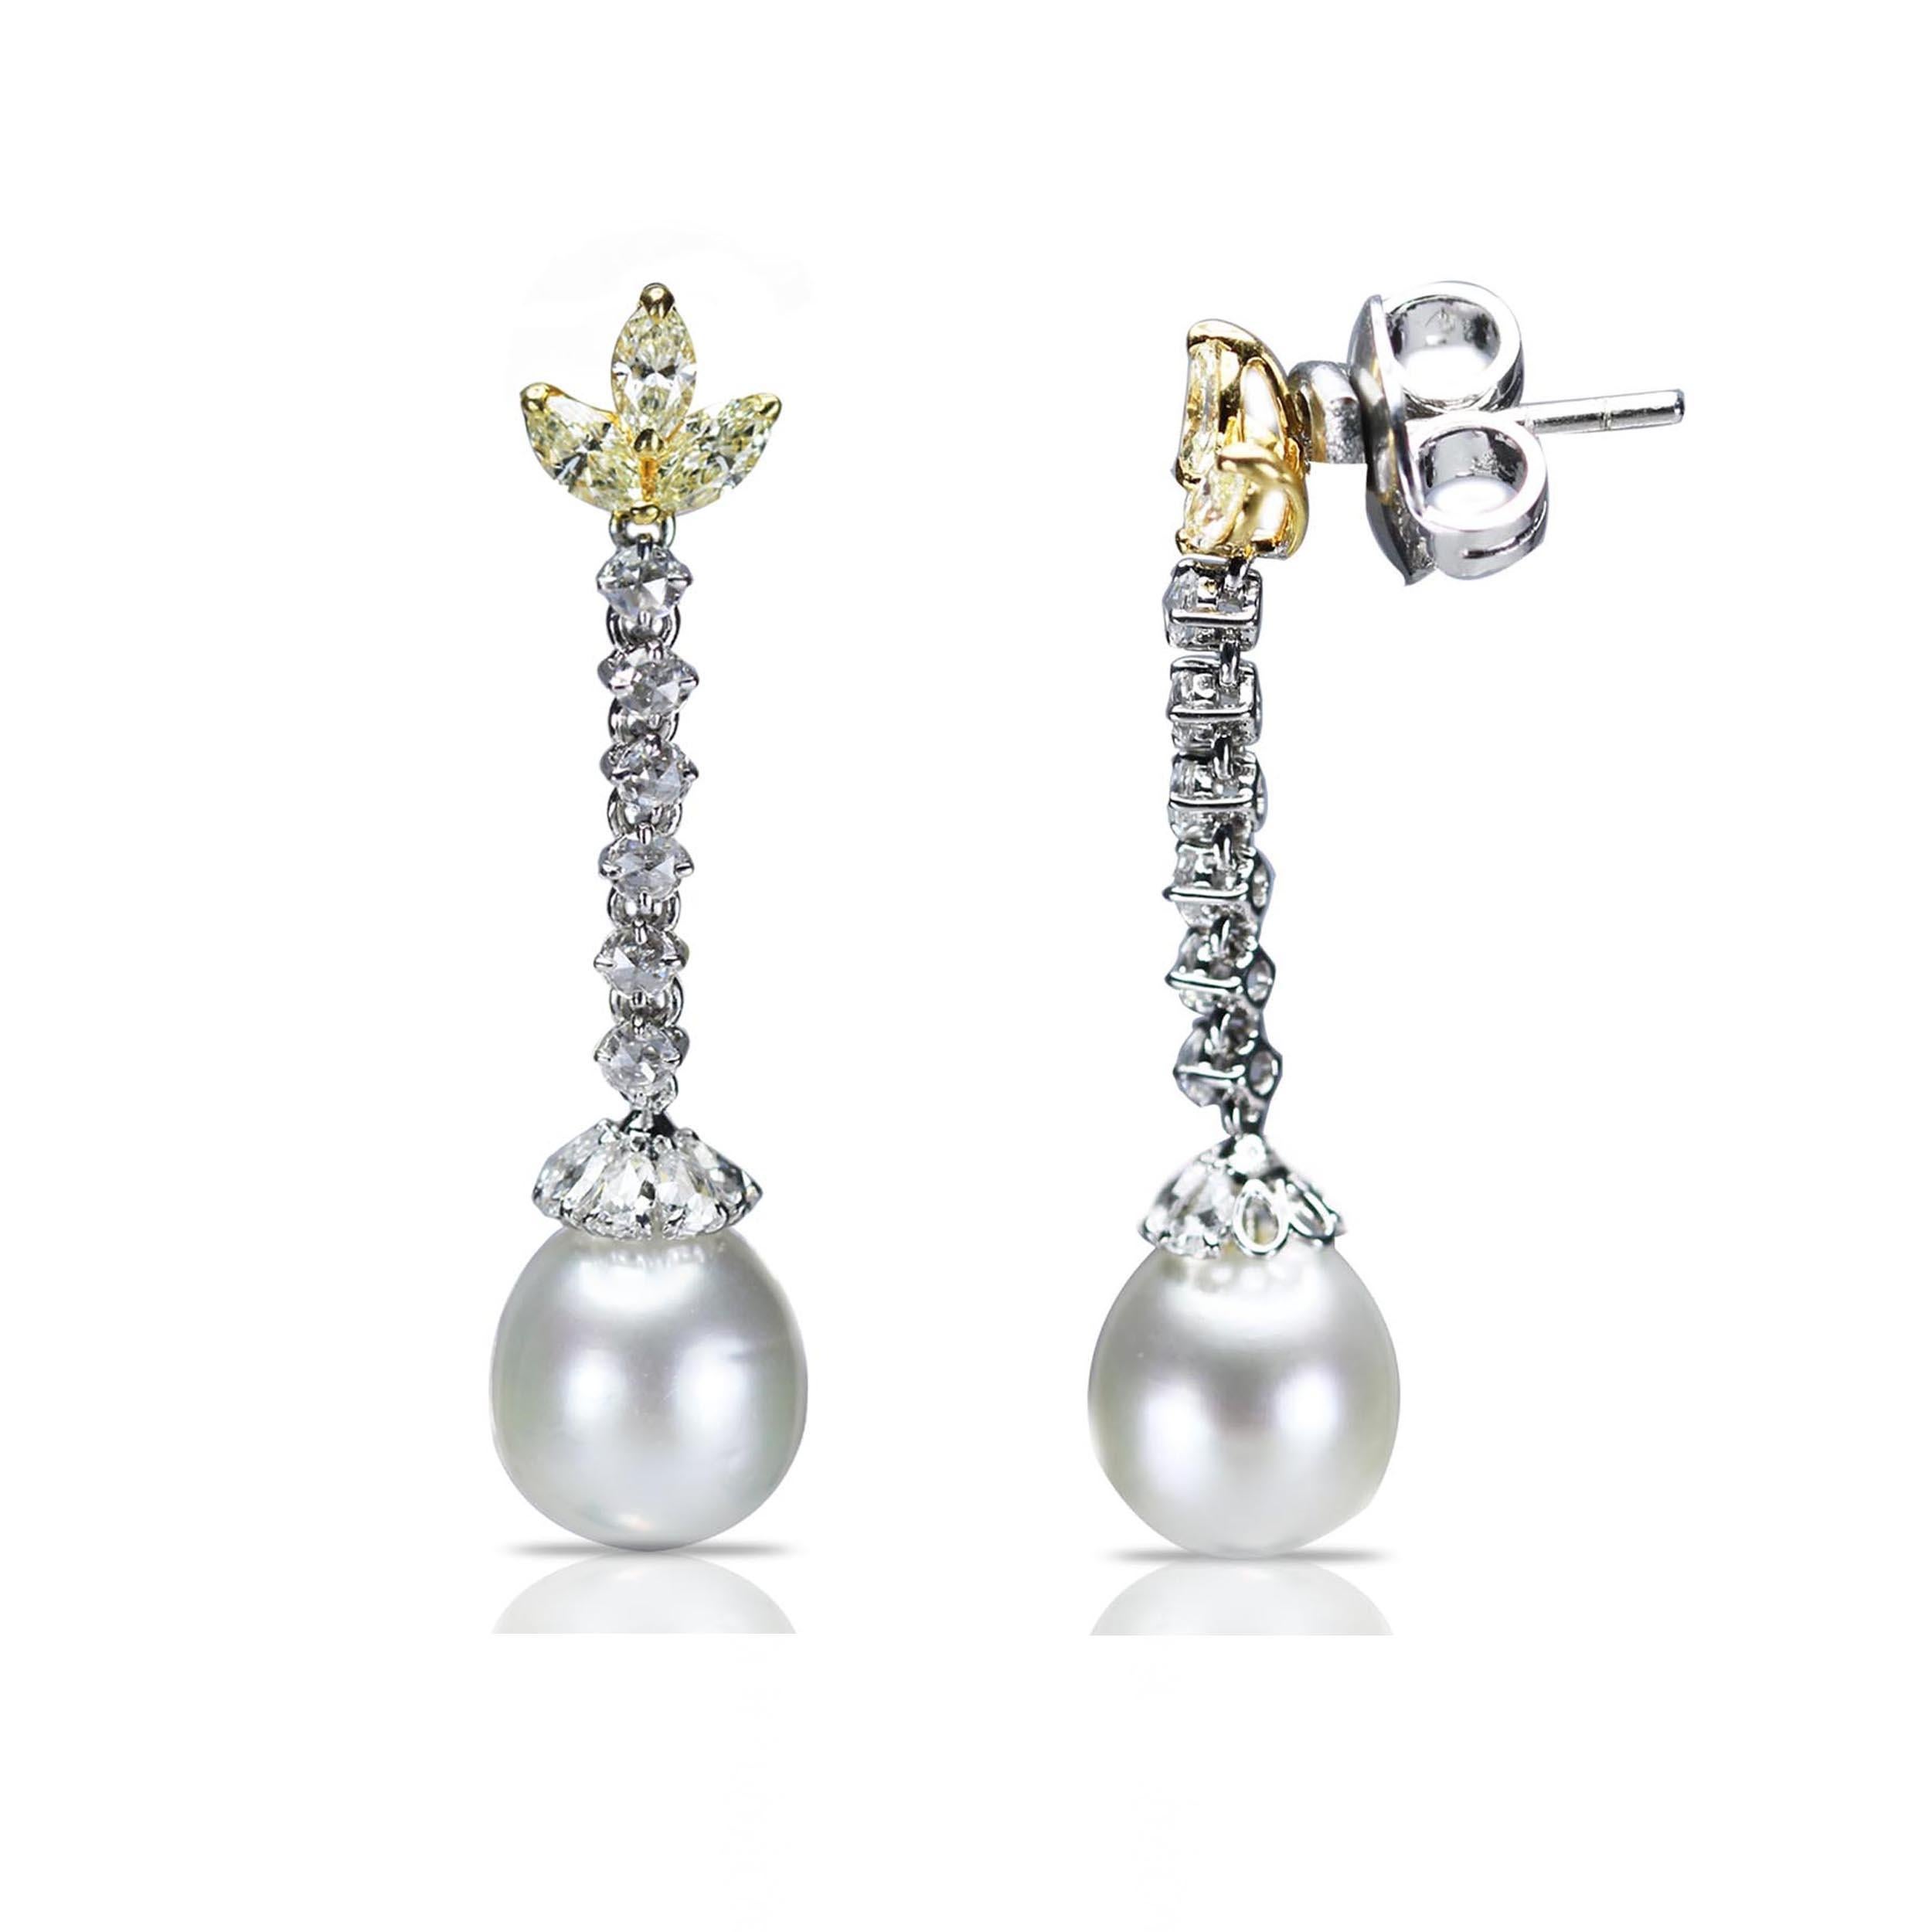 F-G/ VS-SI brilliant cut white diamonds and yellow diamonds, rosecut diamonds and south sea pearl earrings

Delicate and dainty, these earrings are the epitome of elegance. The dangling pair includes an 18K white and yellow gold base studded with F-